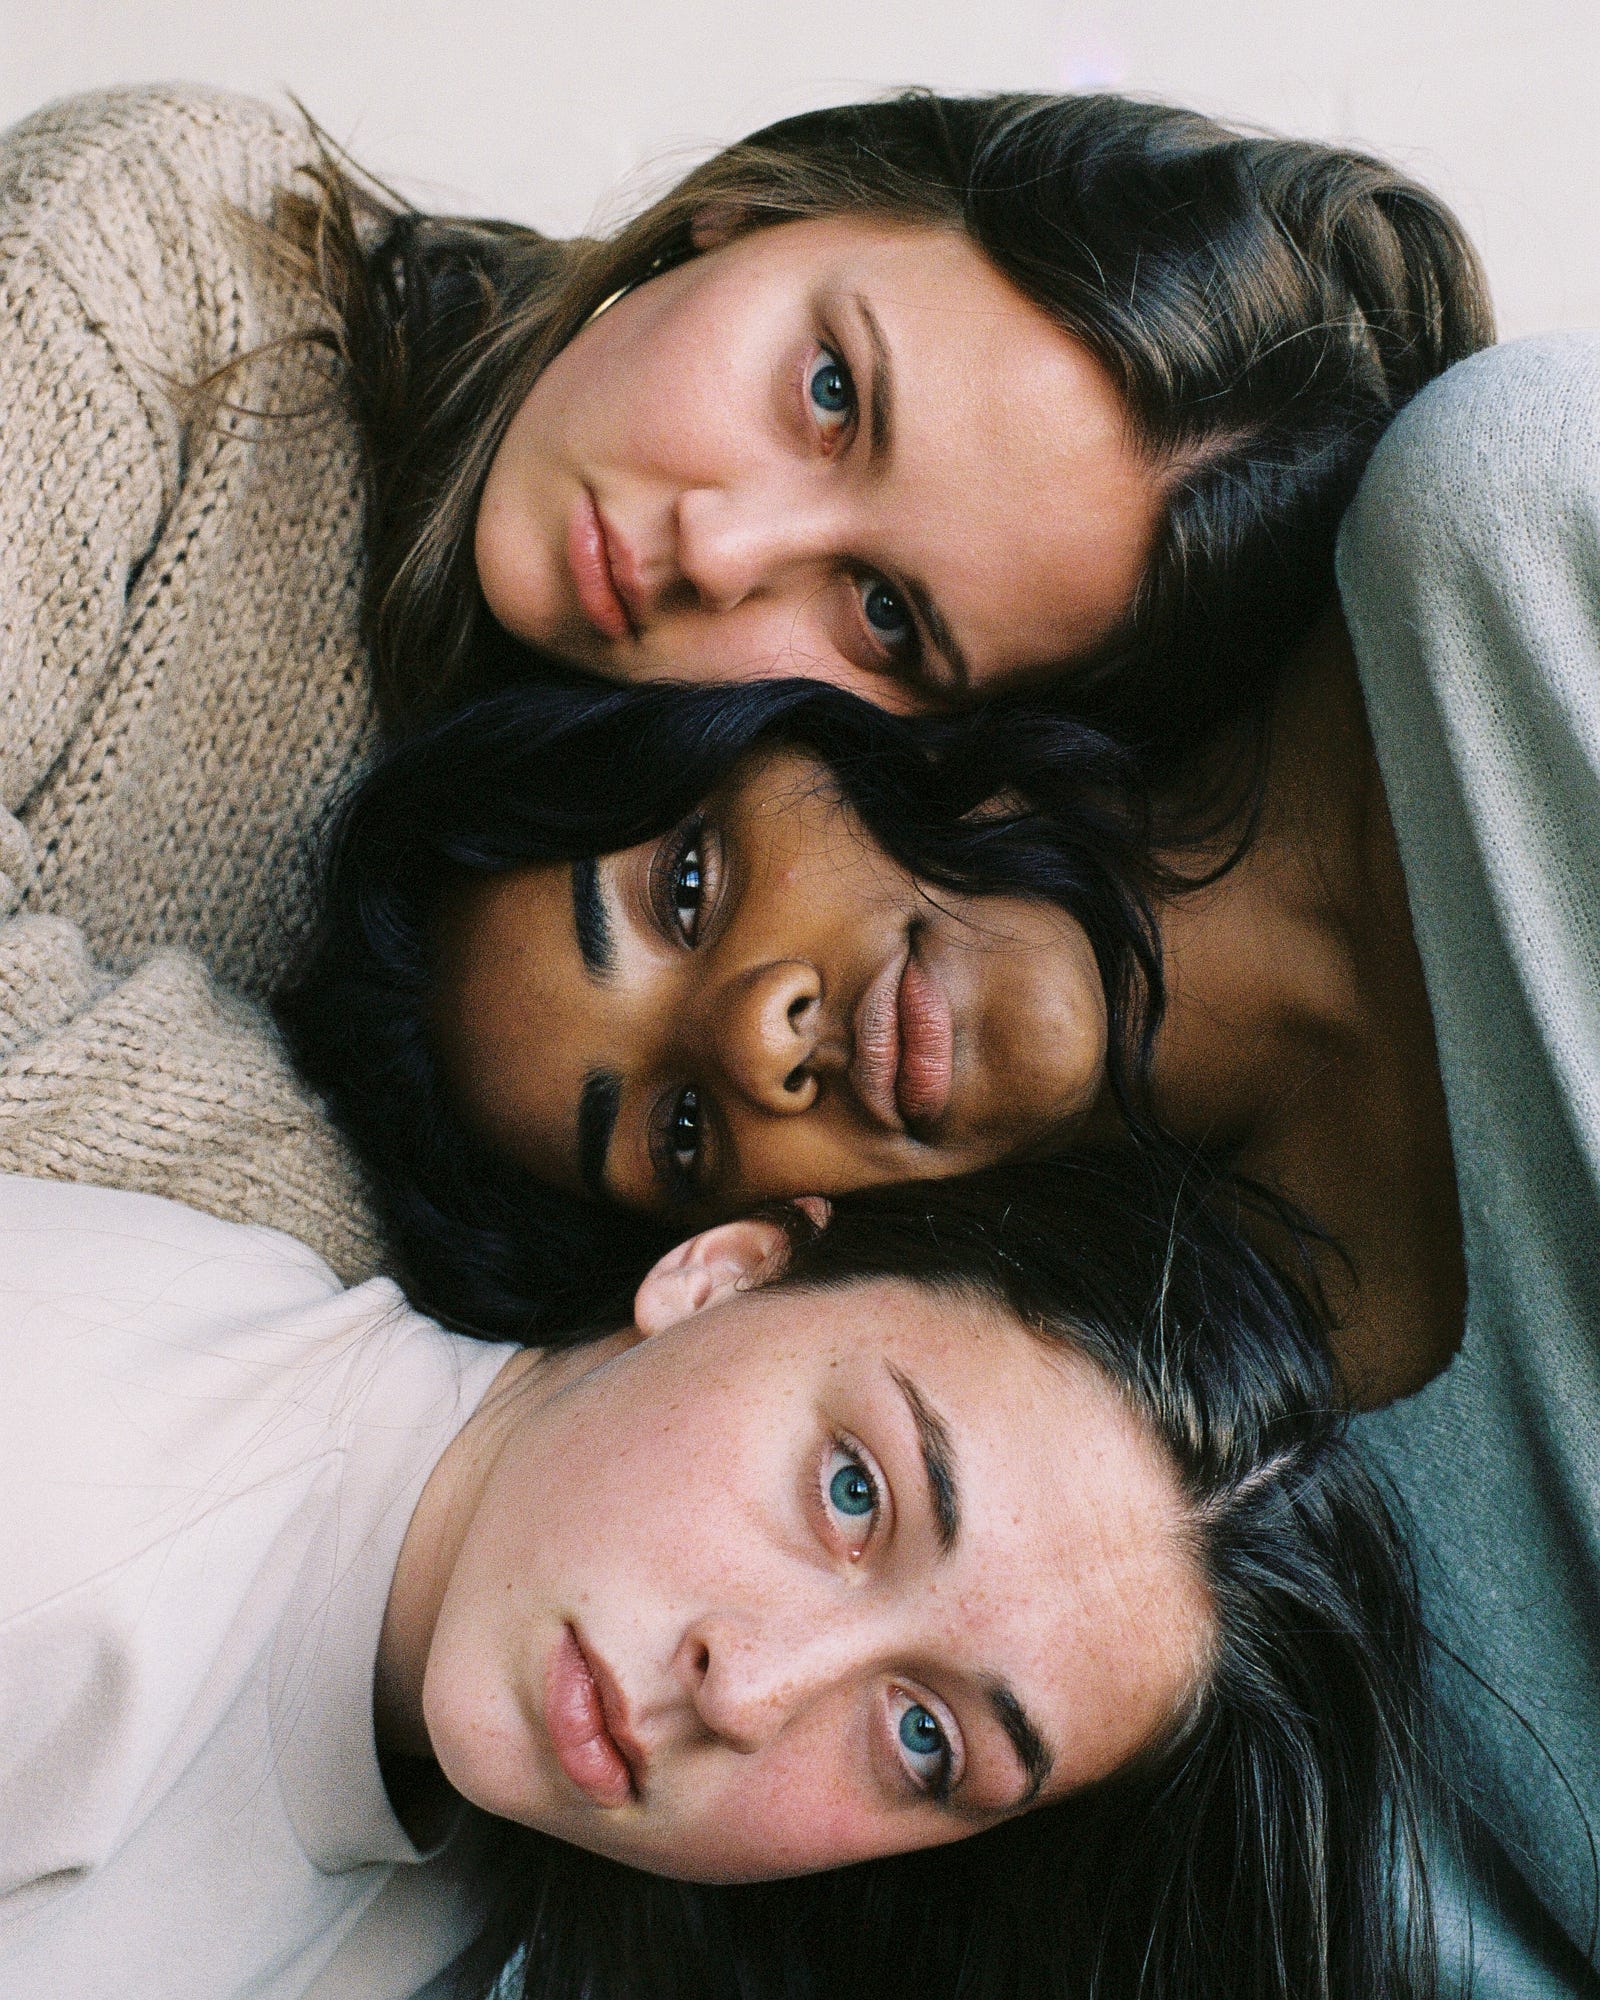 Three women lie down, facing us. Each is see from collarbone level up. The upper and lower women’s bodies are to the left, with a black woman in the middle facing the opposite direction. Hormonal factors play a significant role in breast cancer development as well. Estrogen and progesterone, female sex hormones, regulate the growth and development of breast tissue. Prolonged exposure to high levels of these hormones can increase the risk of breast cancer.